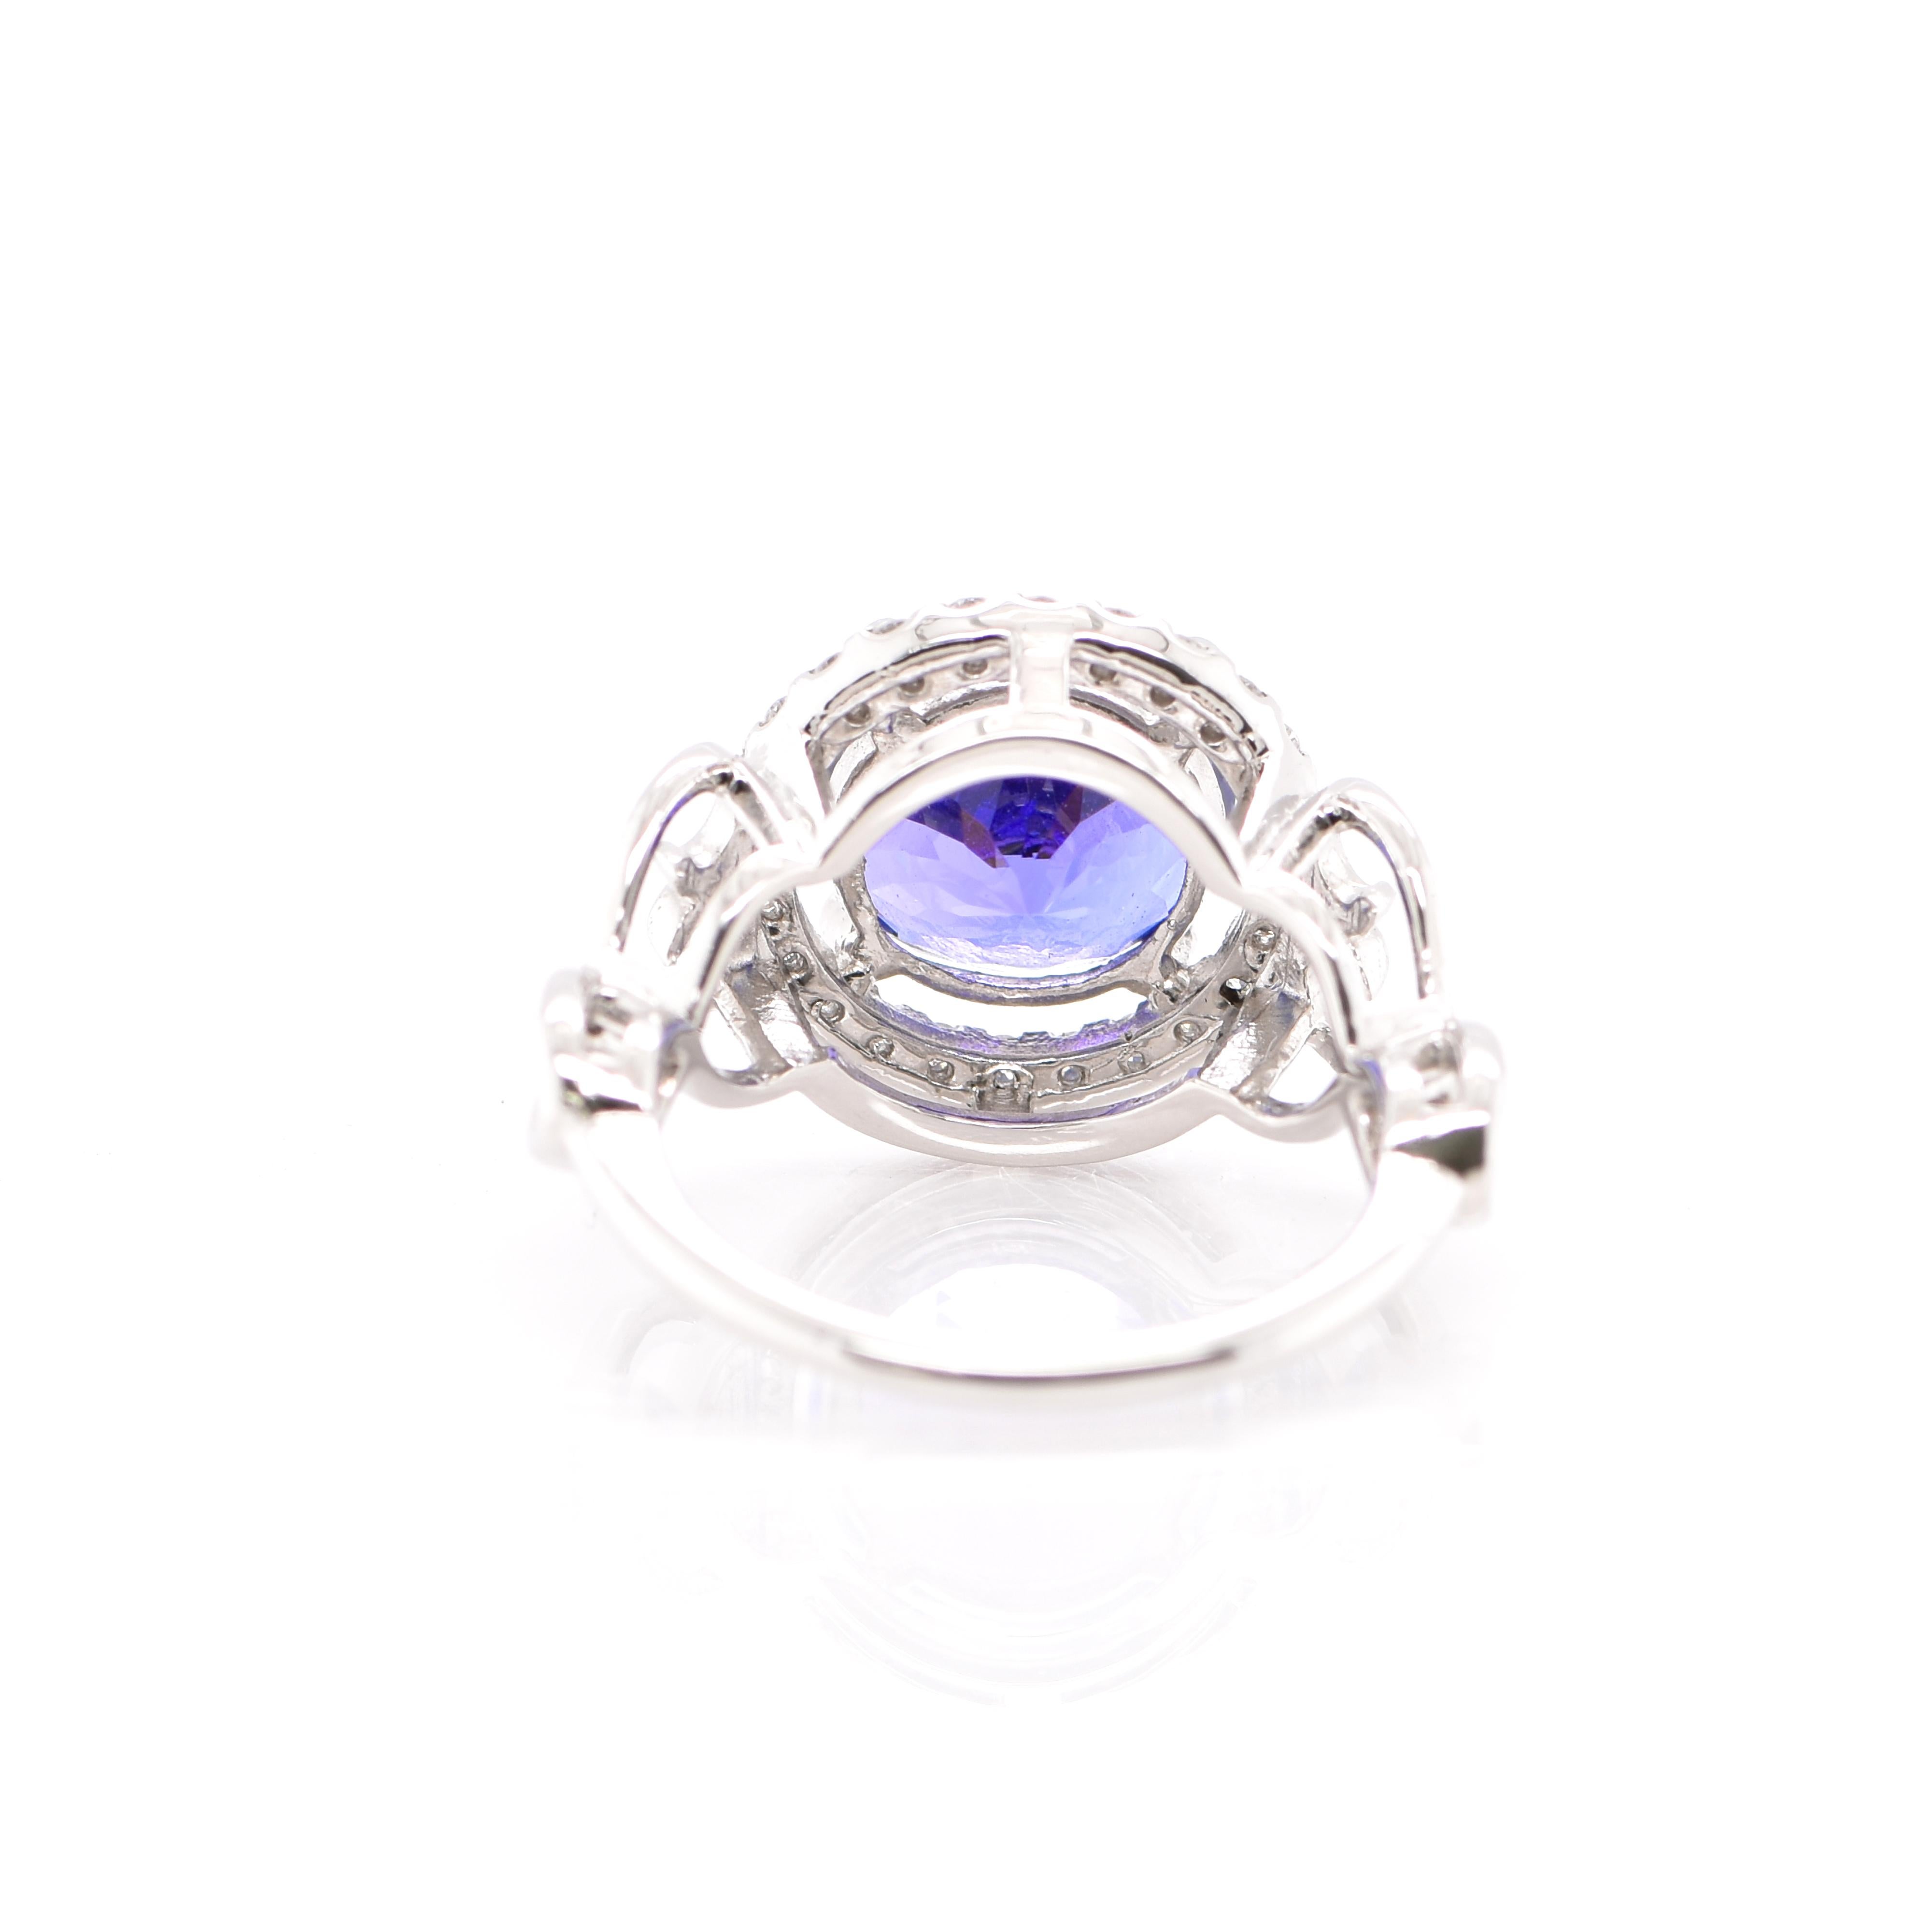 A beautiful Cocktail Ring featuring a 4.24 Carat Round Cut Tanzanite and 0.34 Carats of Diamond Accents set in Platinum. Tanzanite's name was given by Tiffany and Co after its only known source: Tanzania. Tanzanite displays beautiful pleochroic